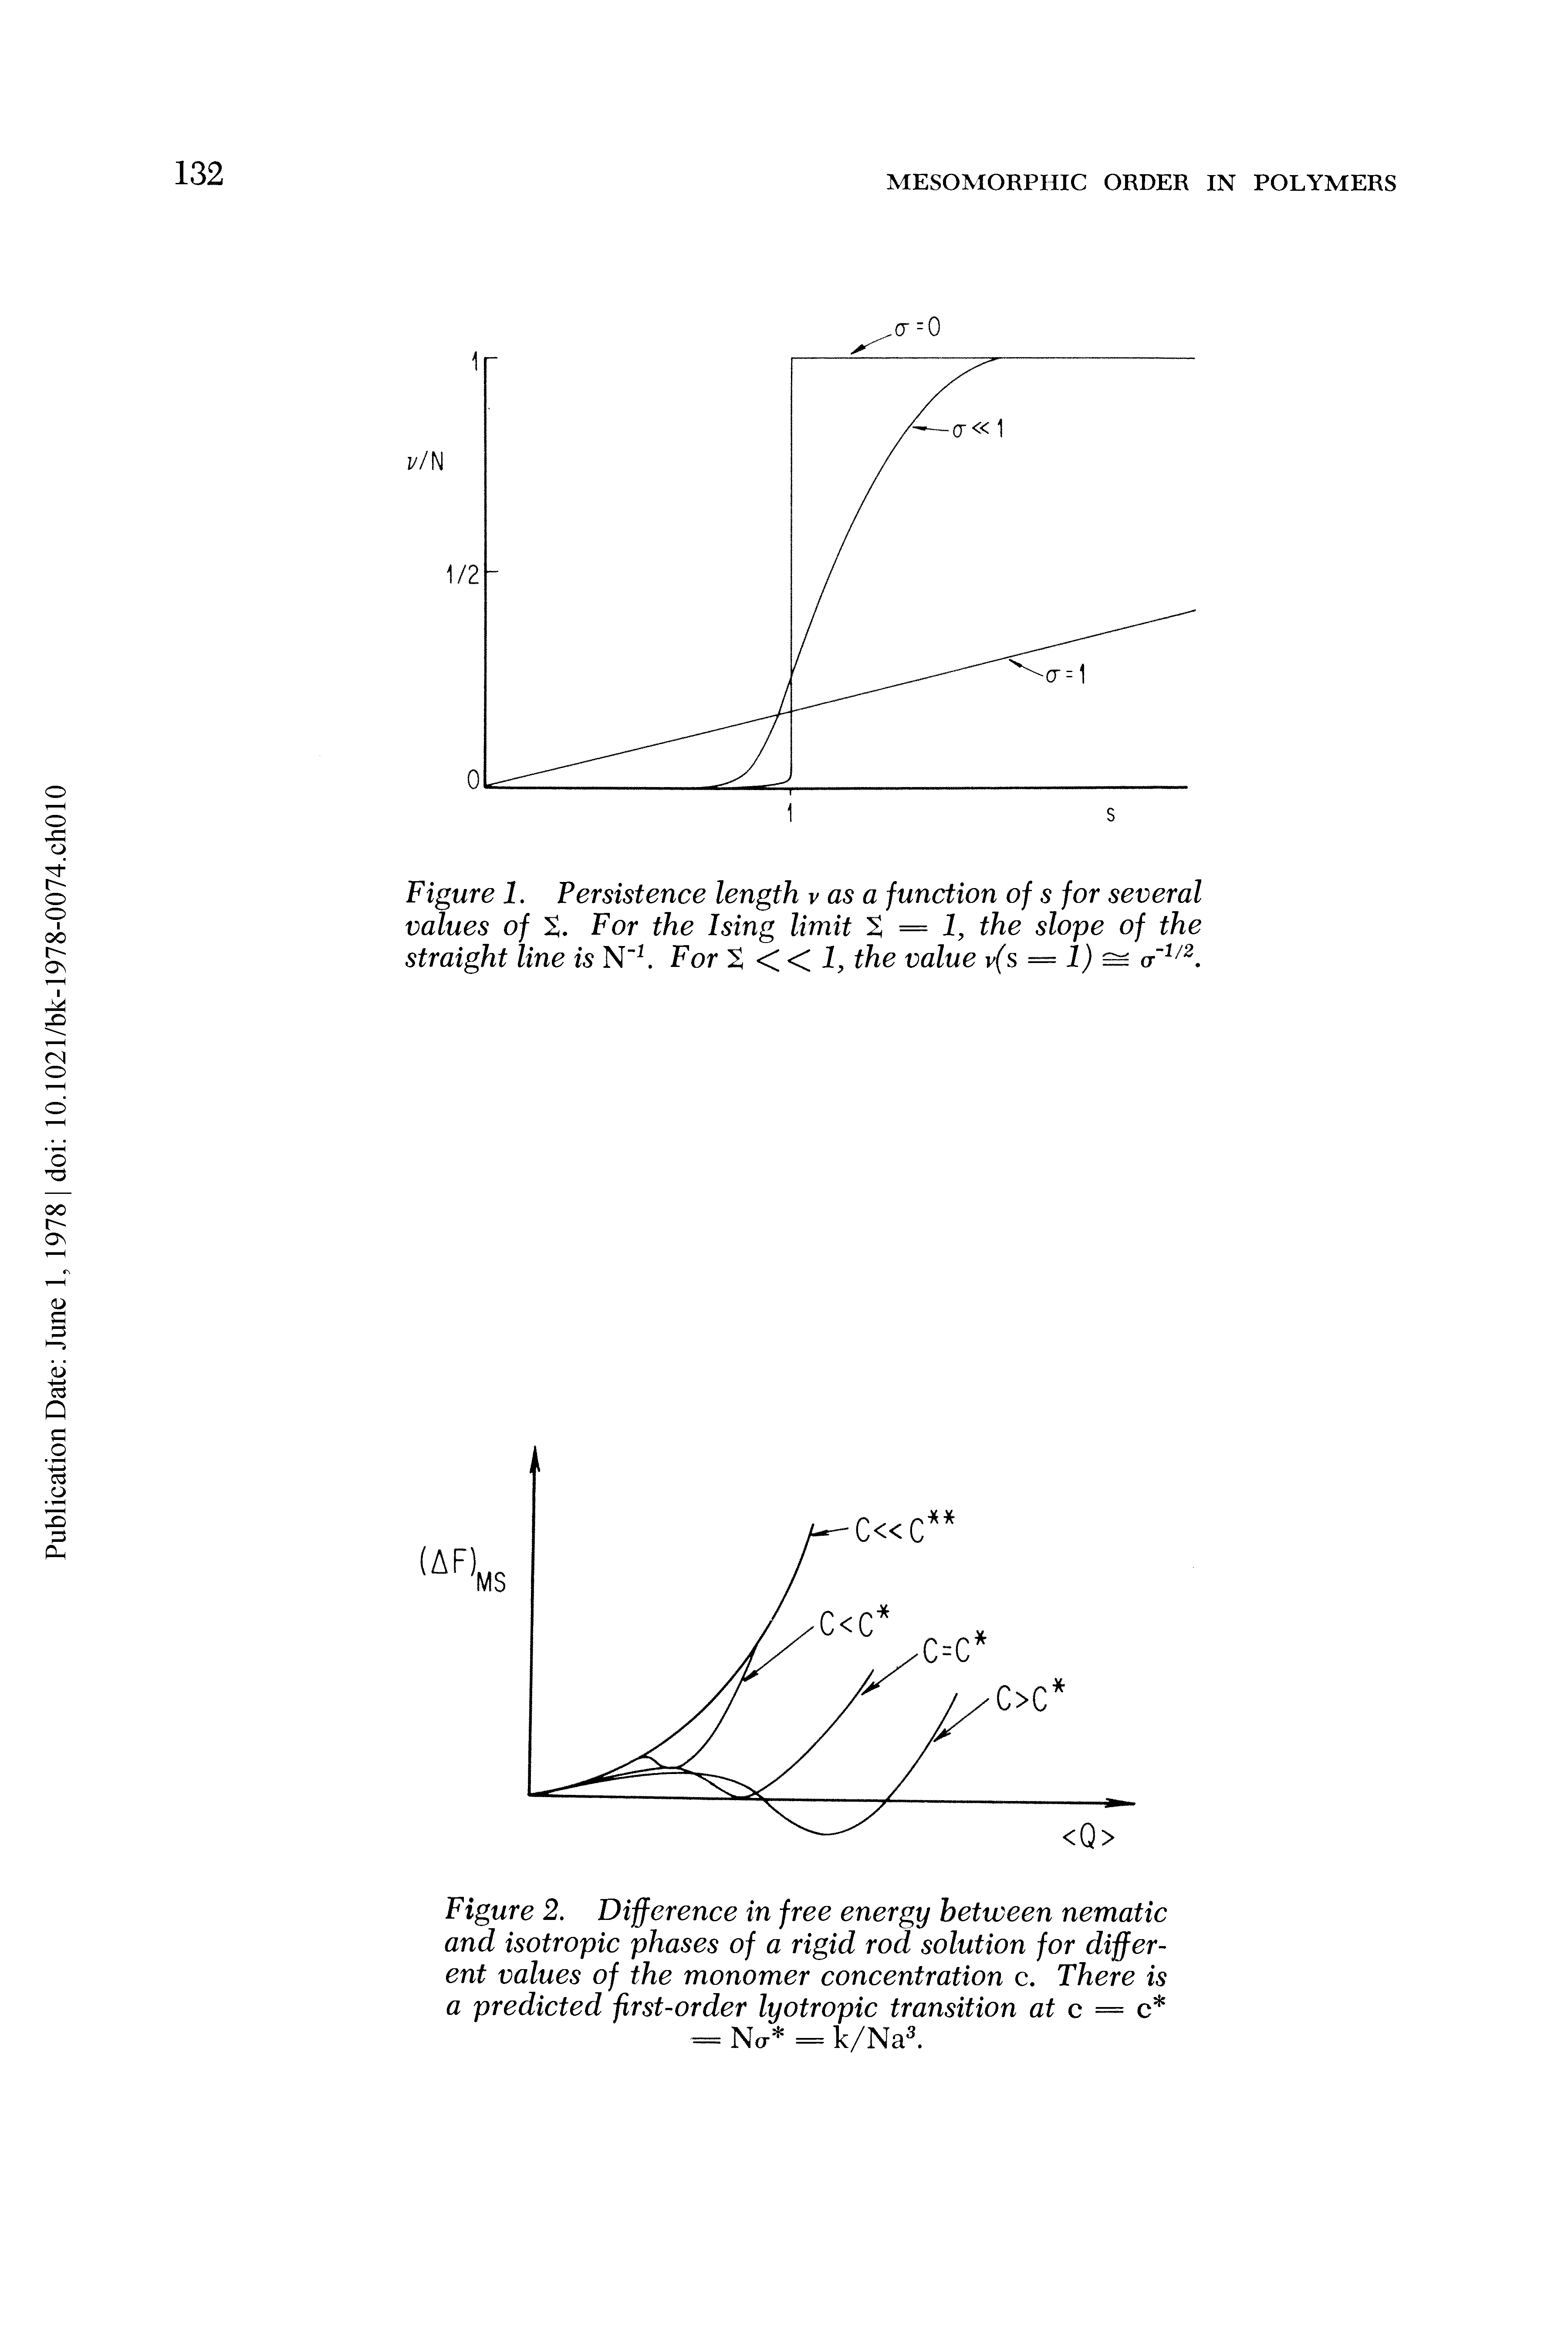 Figure 2. Difference in free energy between nematic and isotropic phases of a rigid rod solution for different values of the monomer concentration c. There is a predicted first-order lyotropic transition at c =...